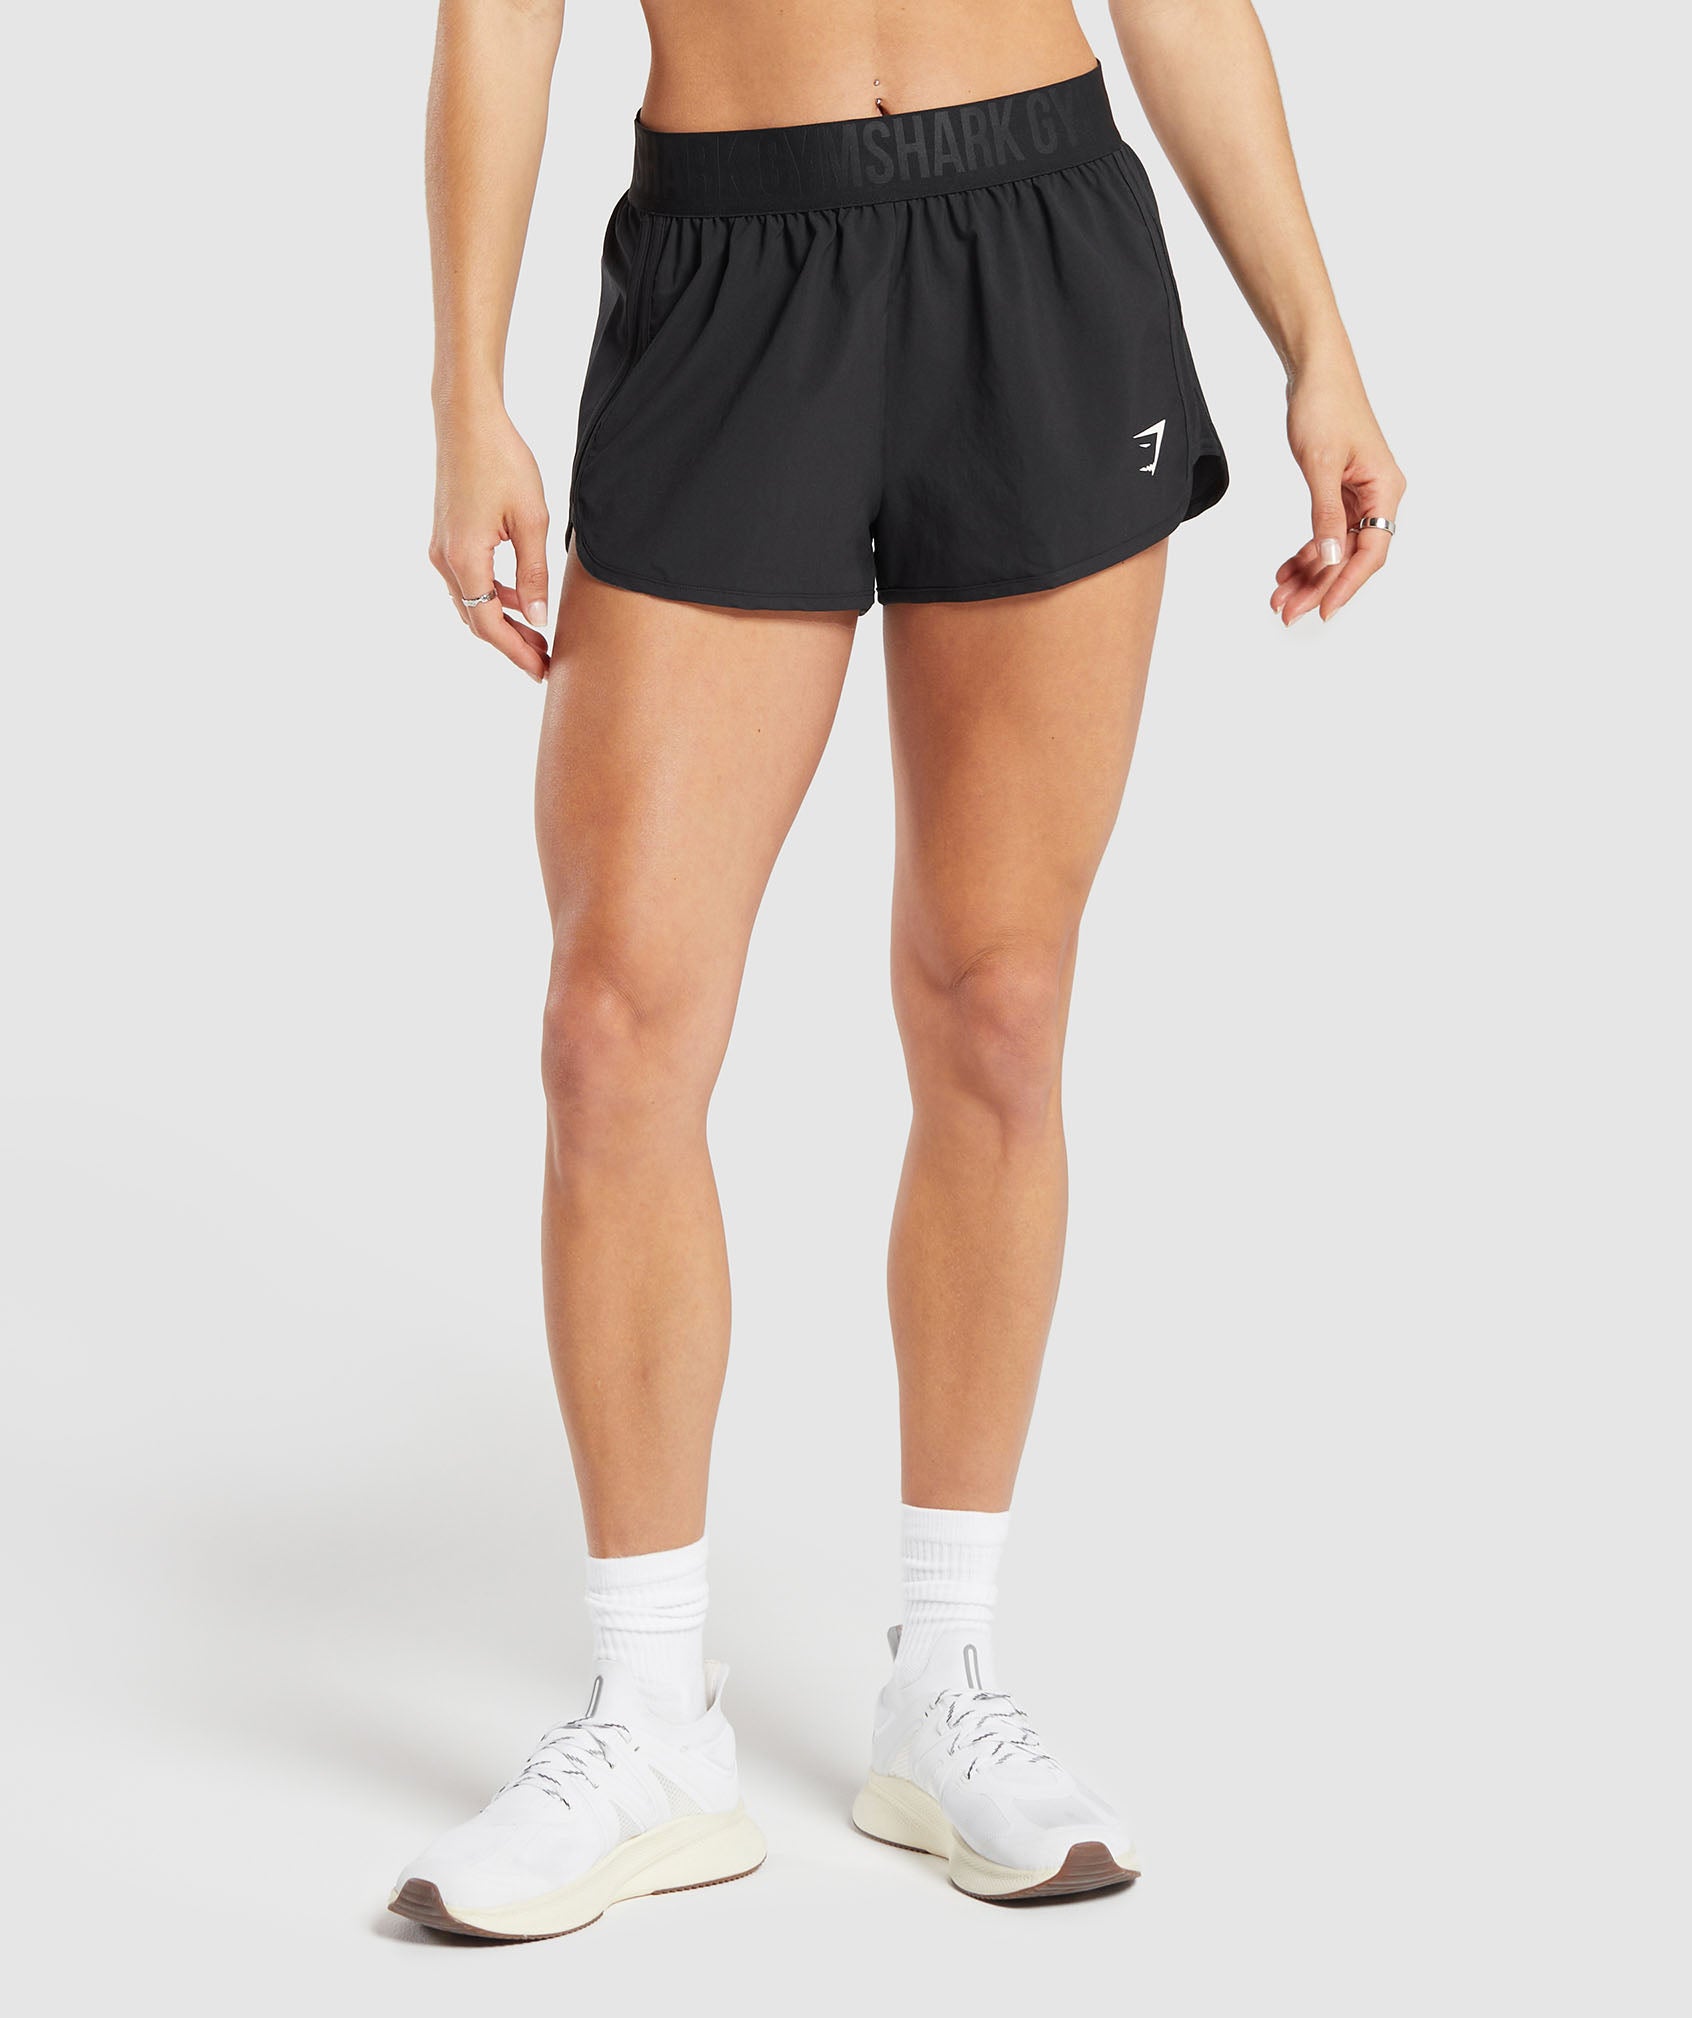 Training Loose Fit Shorts in Black is out of stock